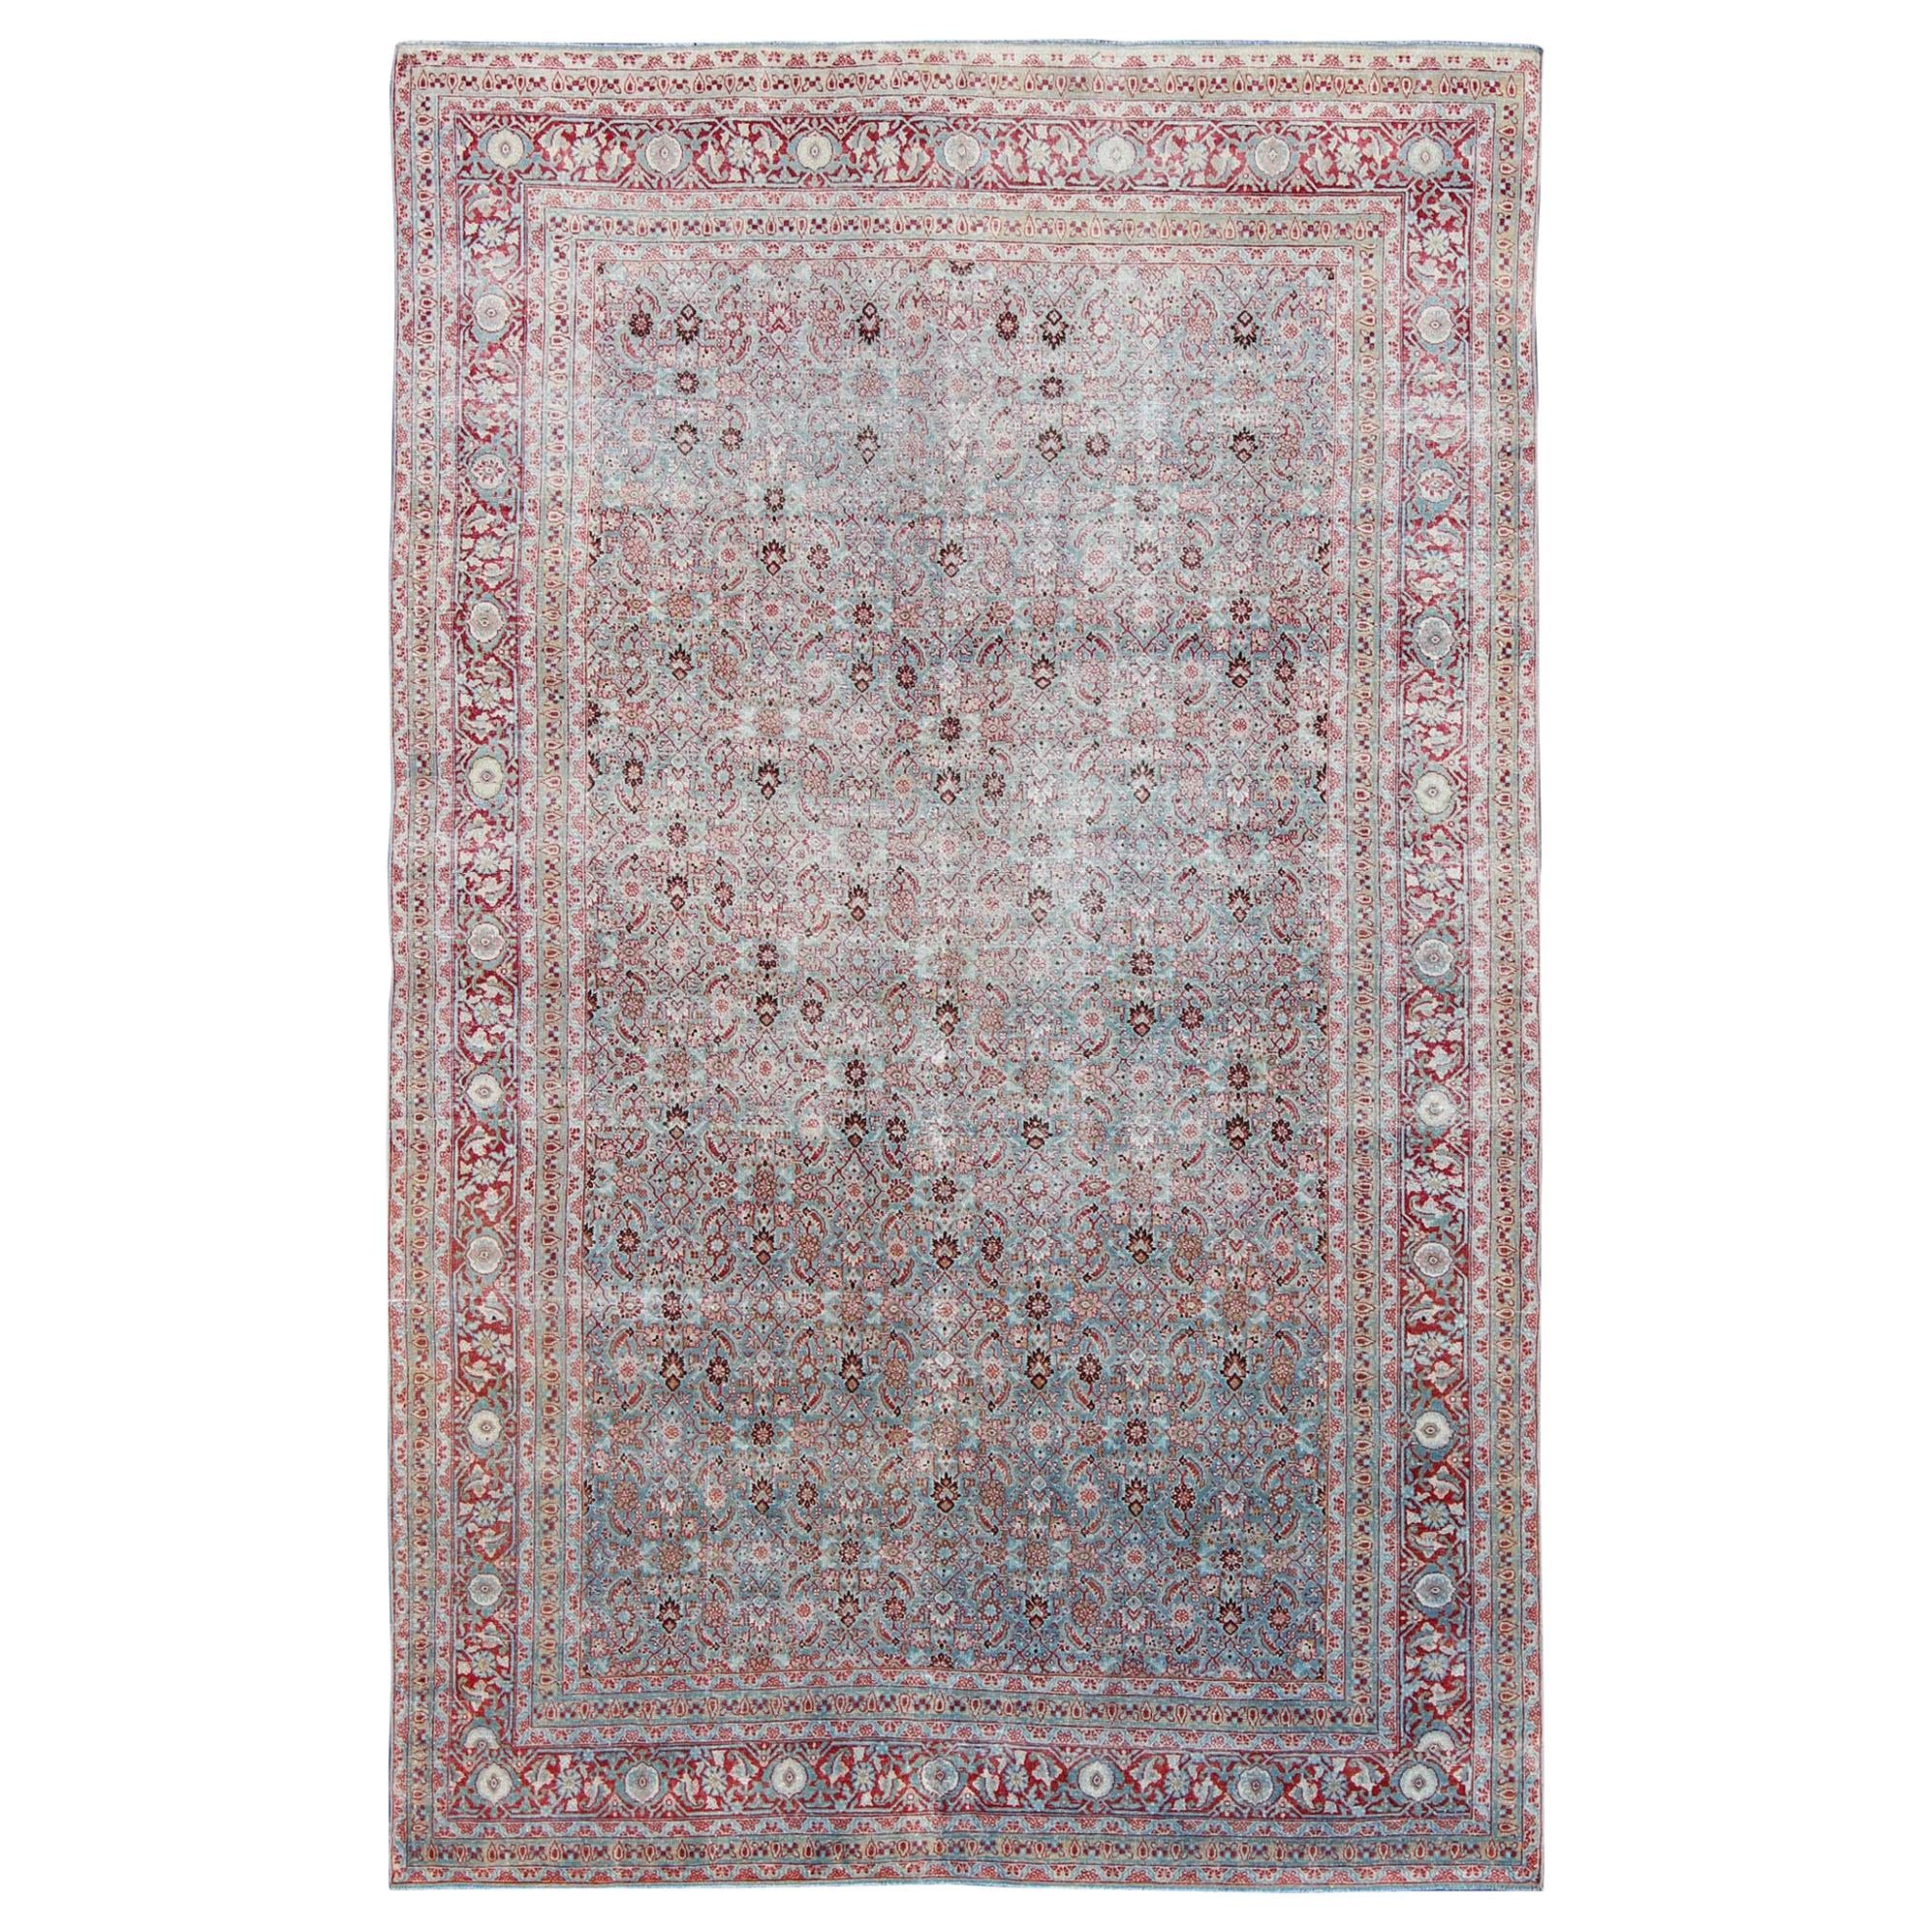 Antique Persian Tabriz Rug with All-Over Geometric Design in Light Blue and Red